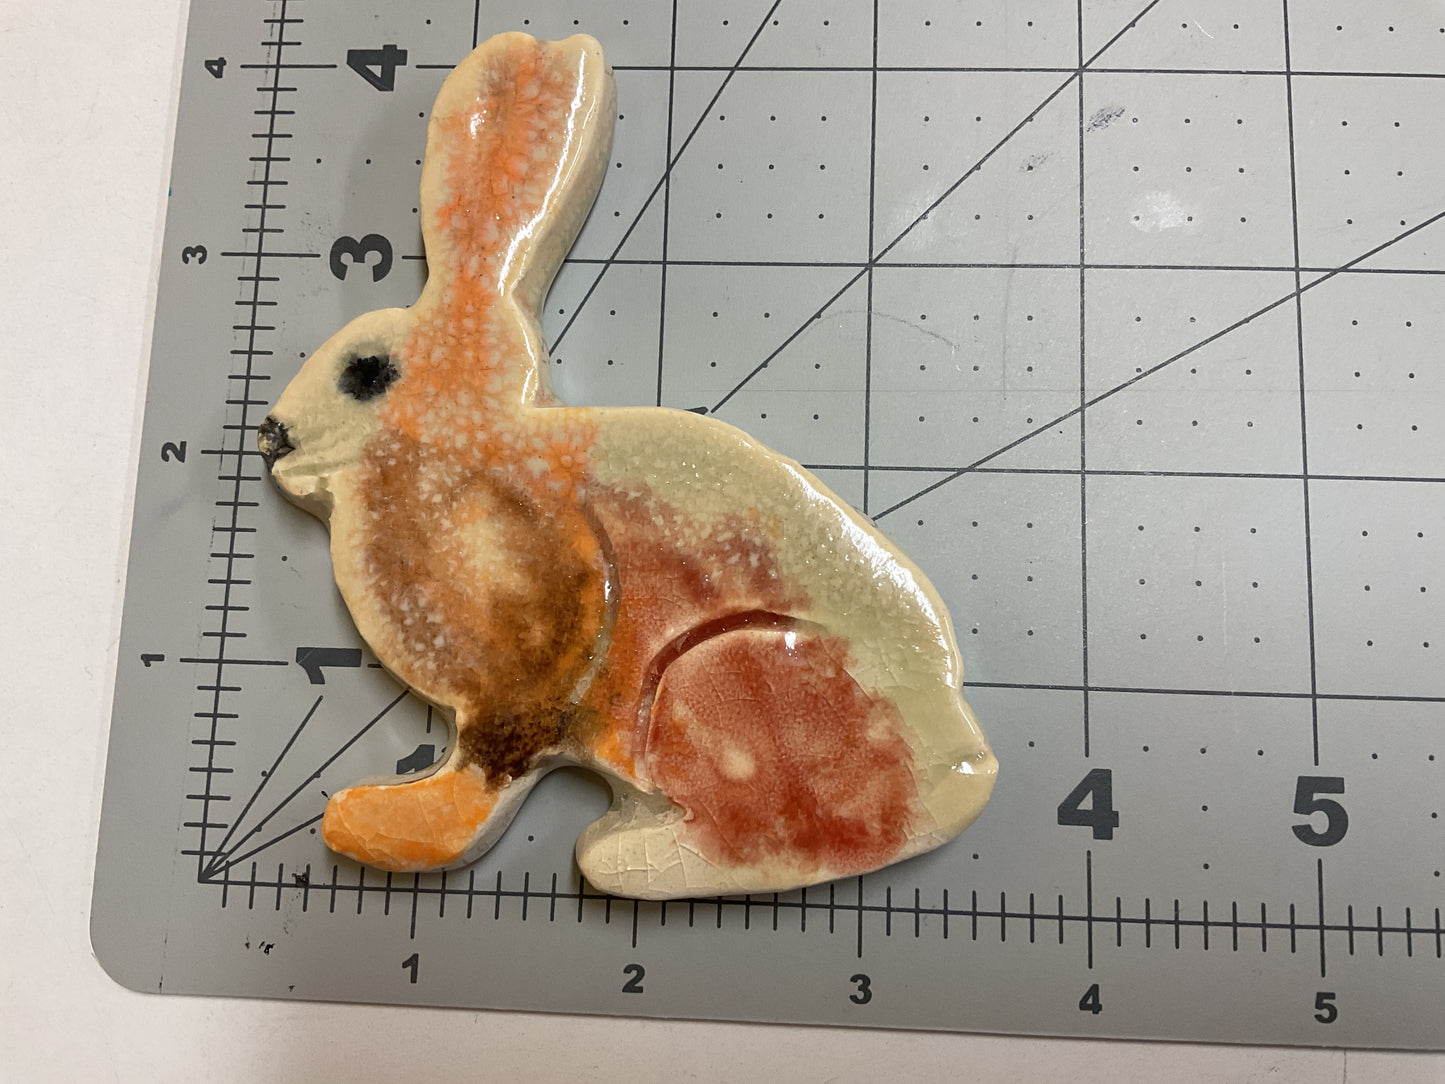 Ceramic Arts Handmade Clay Crafts 4-inch x 3.5-inch Glazed Rabbit by Alec Lopez and Lisa Uptain